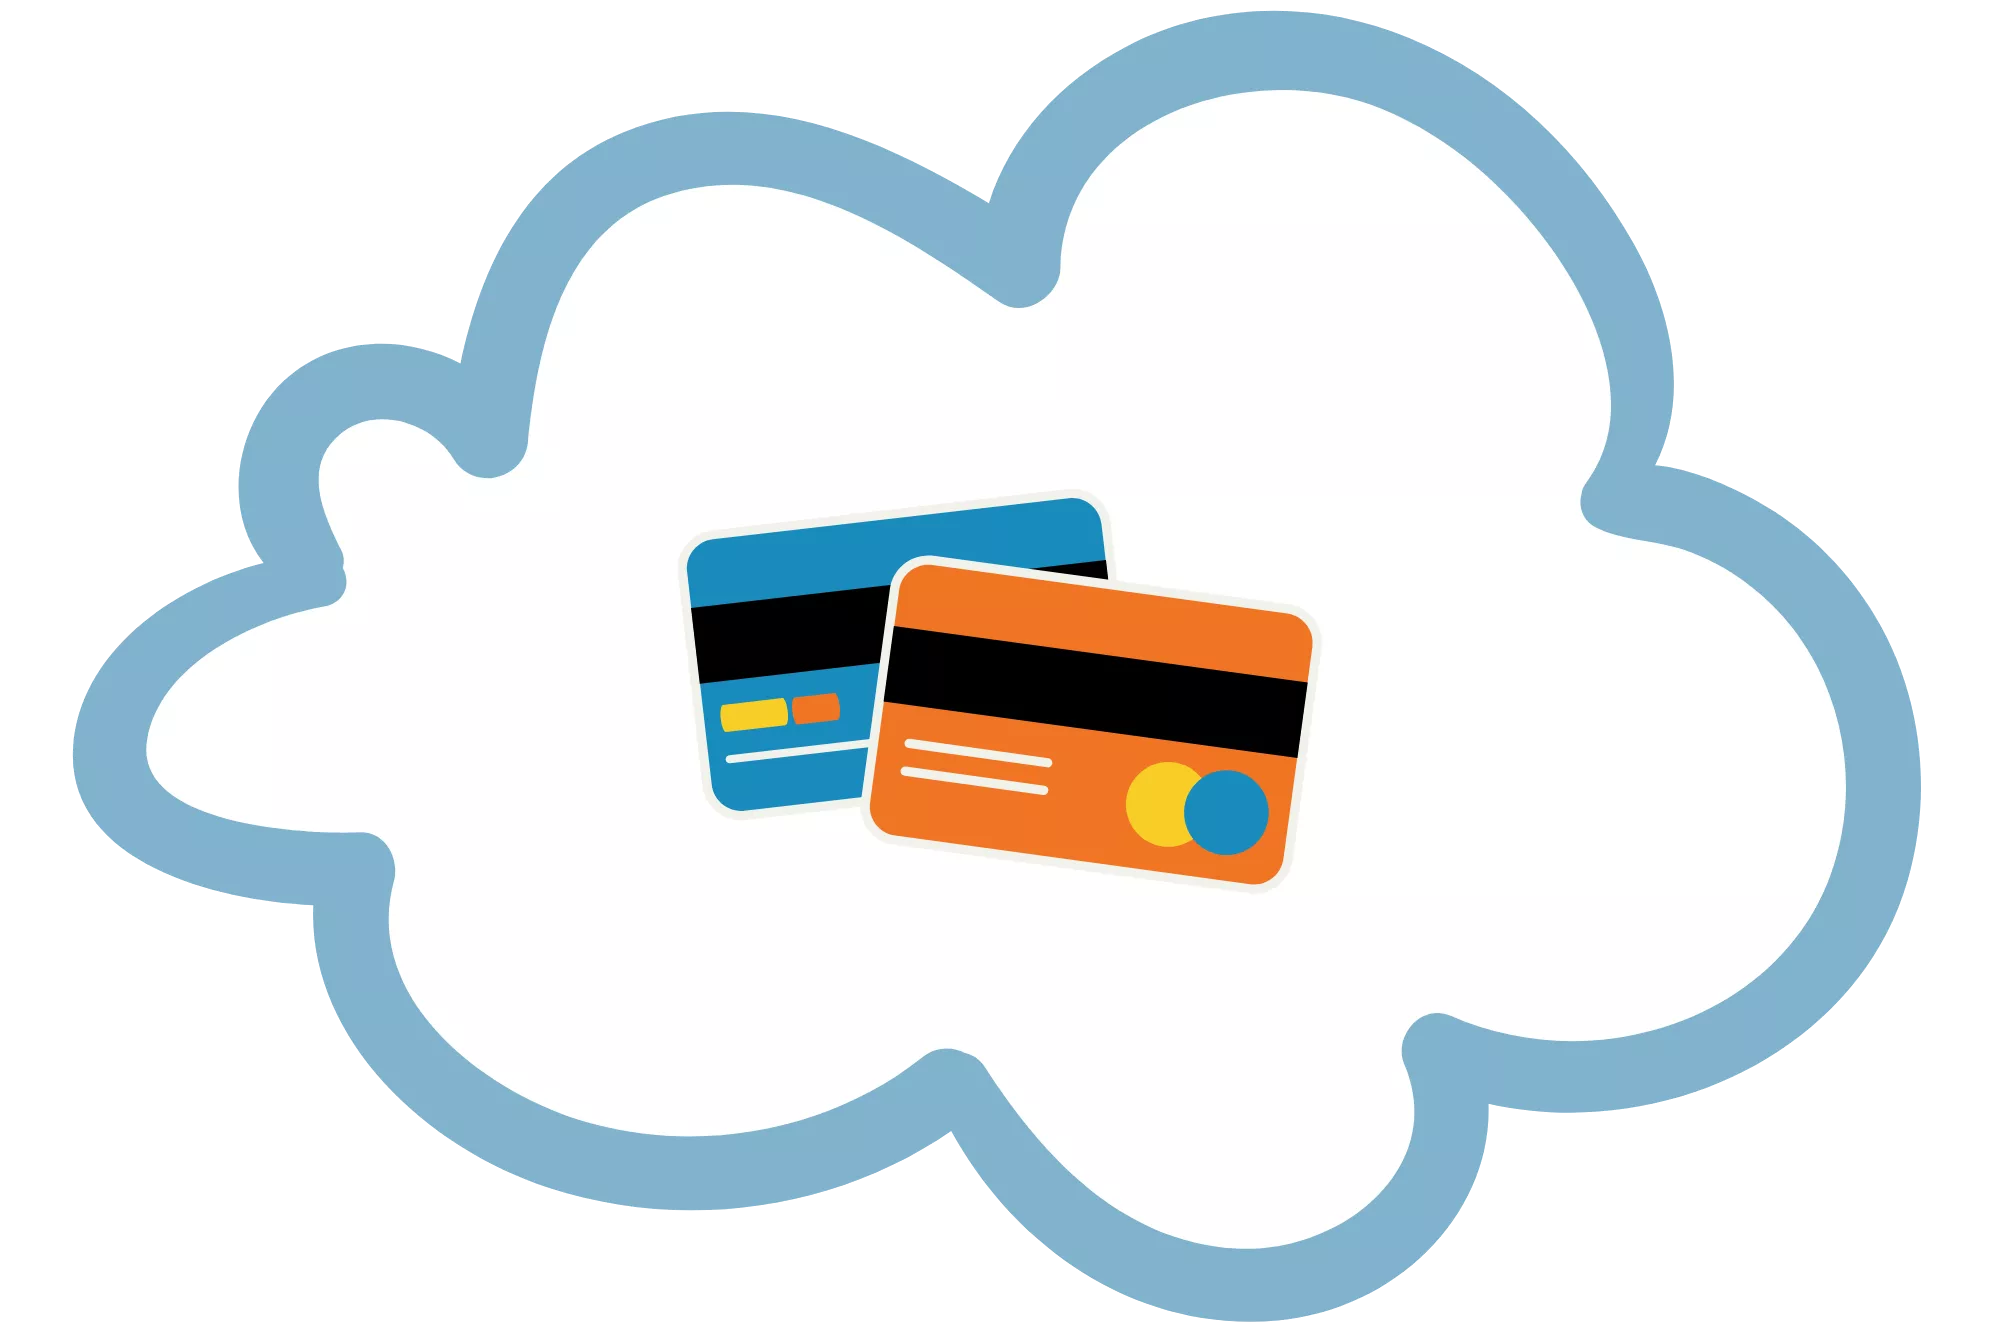 A cloud with credit cards in it to that will be charged authorize.net fees.